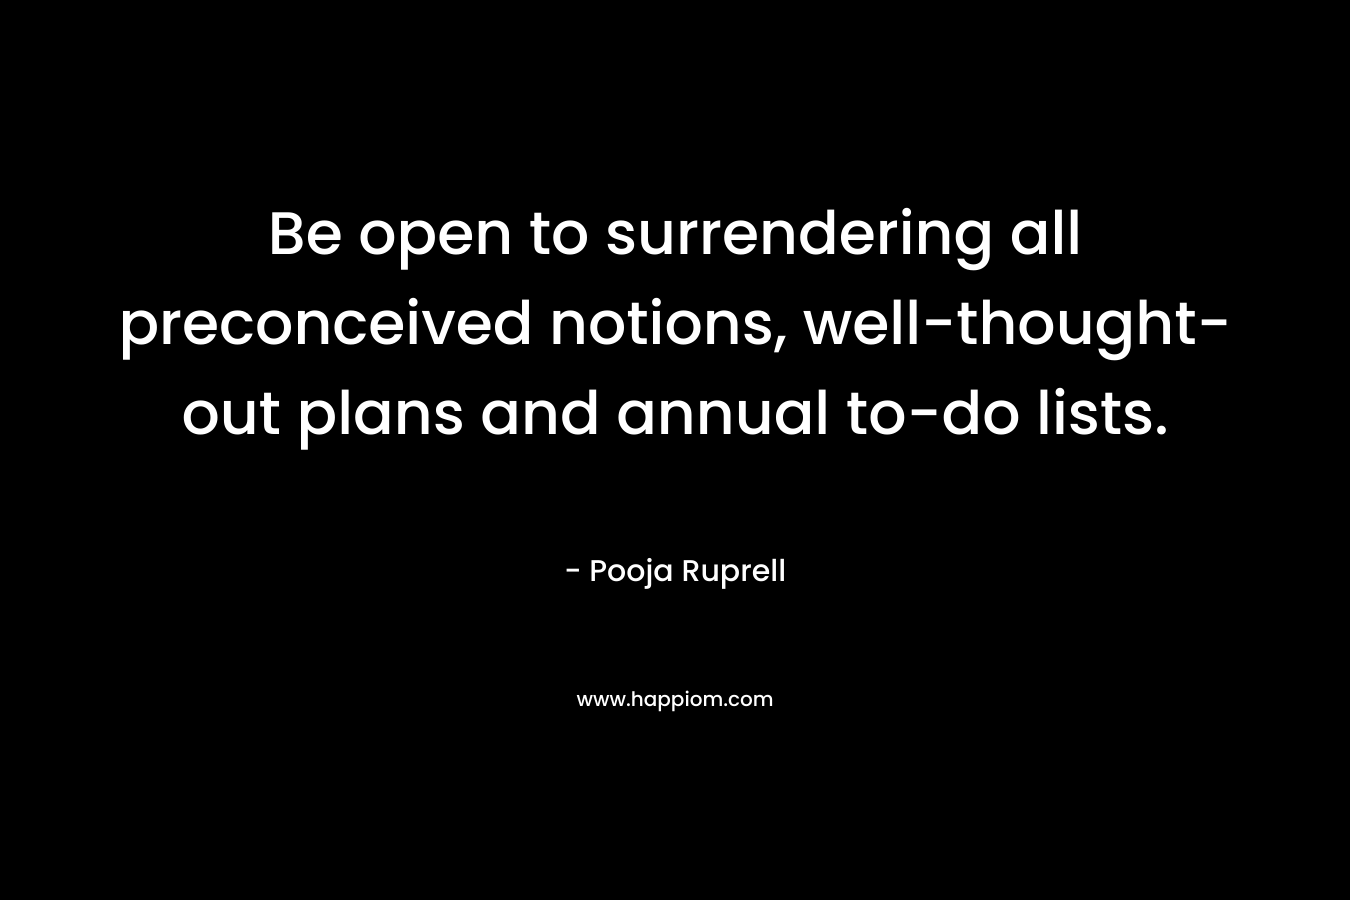 Be open to surrendering all preconceived notions, well-thought-out plans and annual to-do lists. – Pooja Ruprell